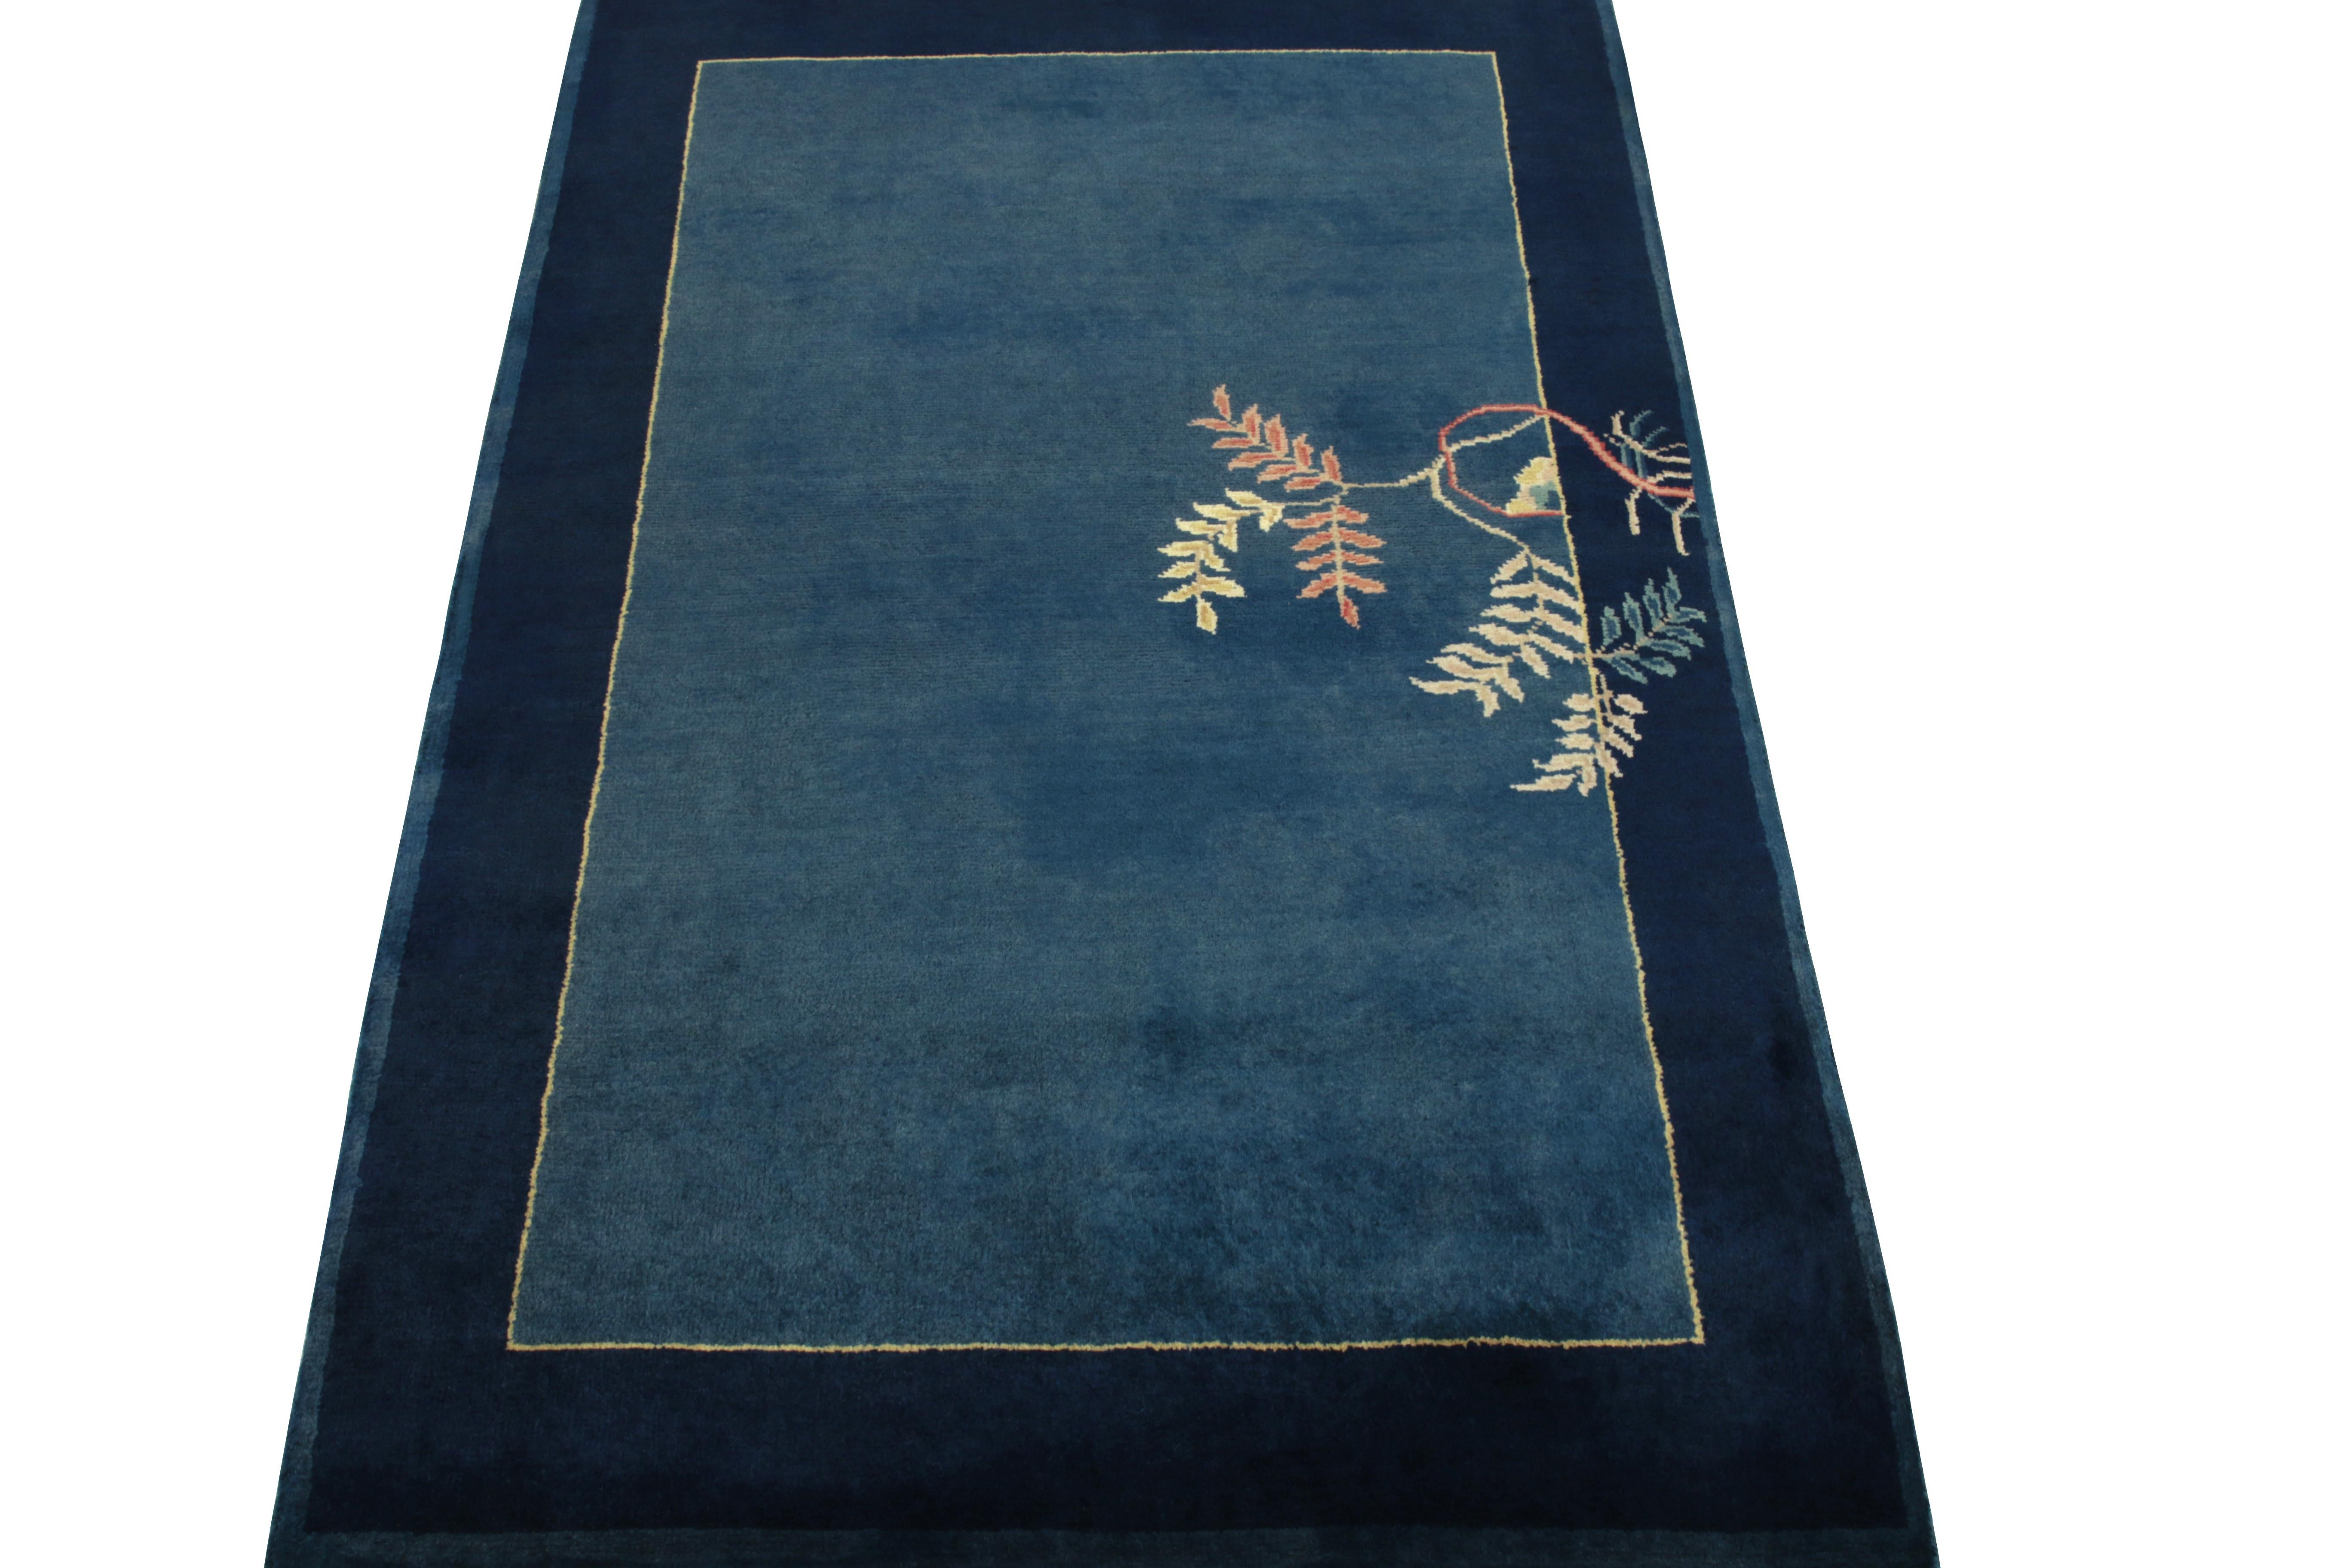 Hand-knotted in wool, a 3x5 Art Deco rug from our Antique & Vintage collection exemplifying 1920s Chinese Deco inspiration. The gorgeous pattern alludes to a blossoming tree in lime green, sky blue & muted pink tones resting harmoniously on an